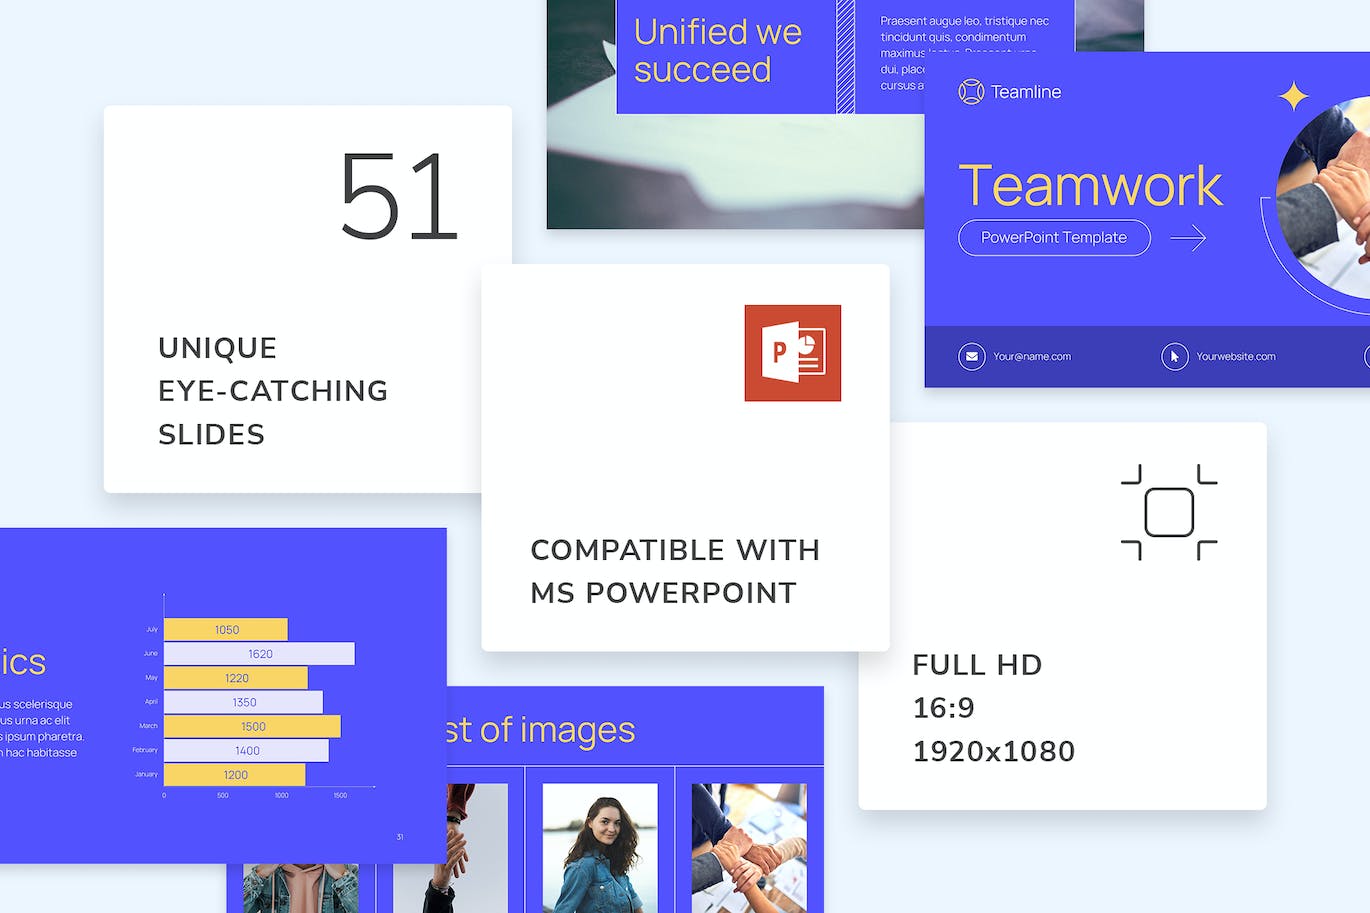 Collection of images of amazing presentation template slides on the theme of teamwork.